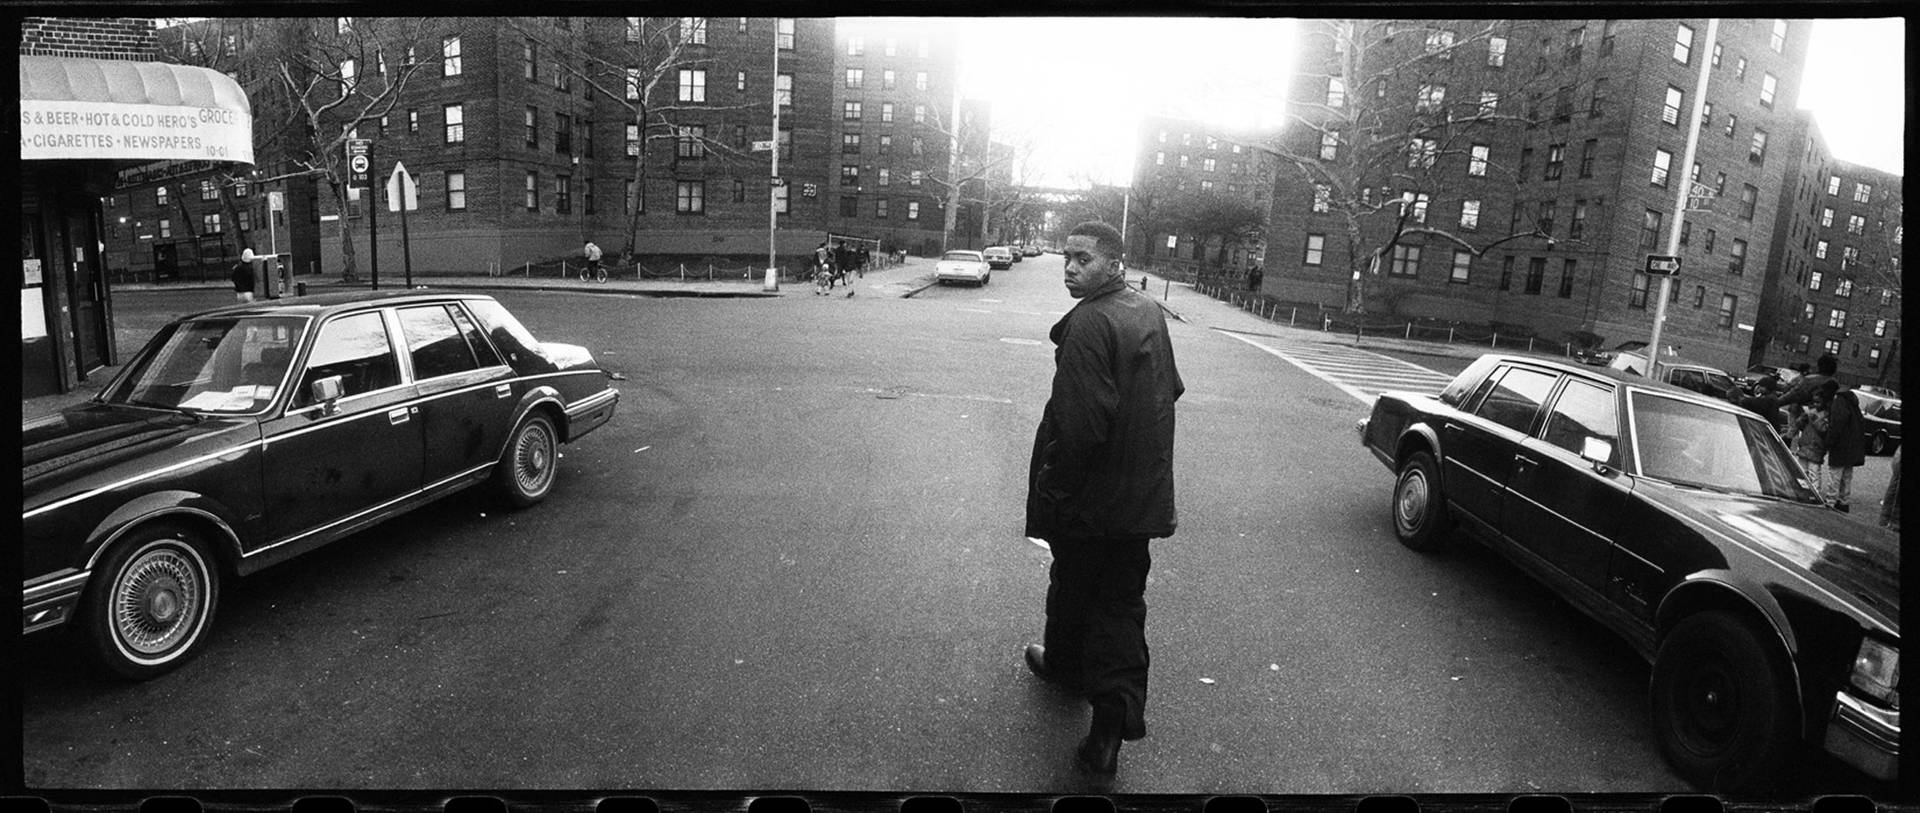 Download Poster Of Nas Time Is Illmatic Album Wallpaper